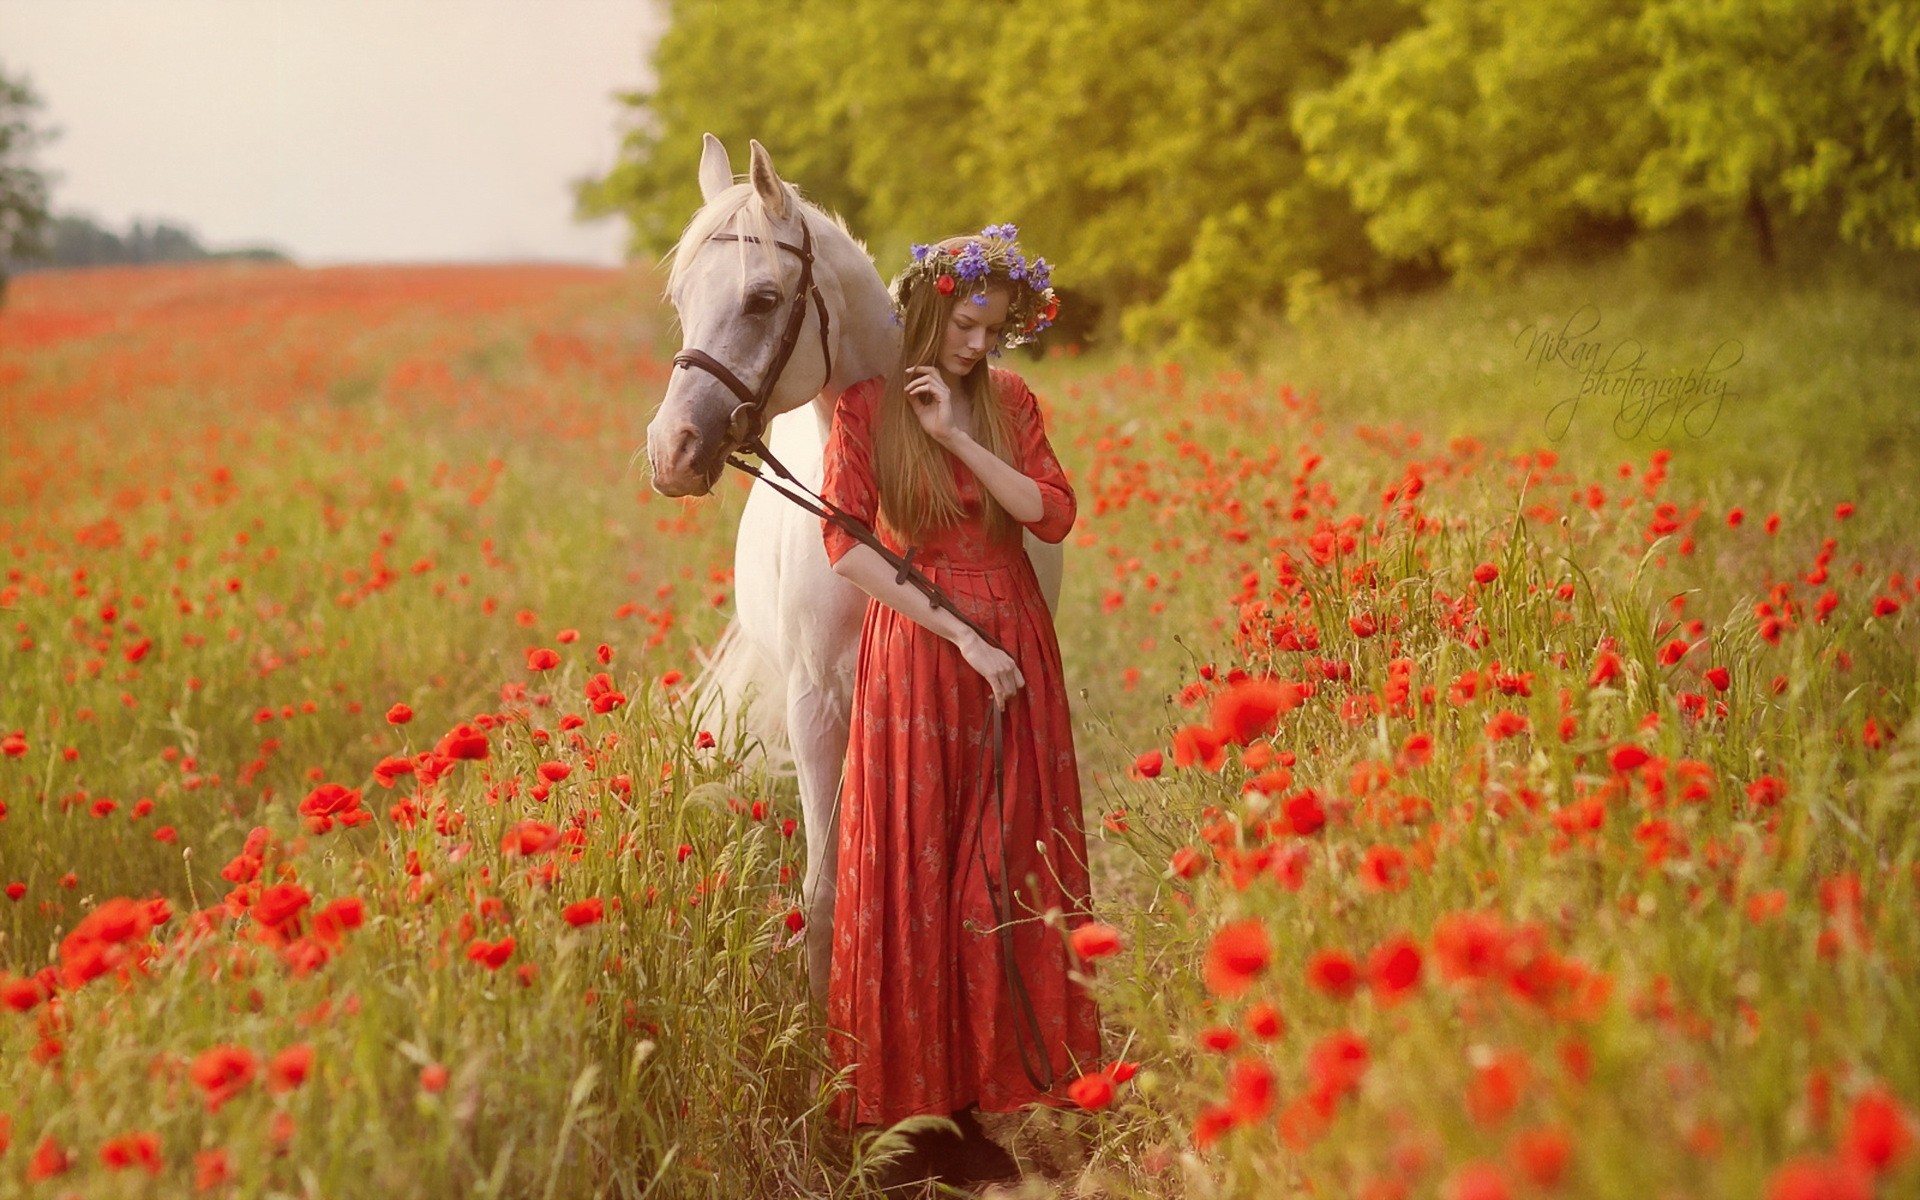 People 1920x1200 women outdoors horse nature flowers animals poppies women women with horse mammals field flower crown outdoors dress red dress red clothing standing